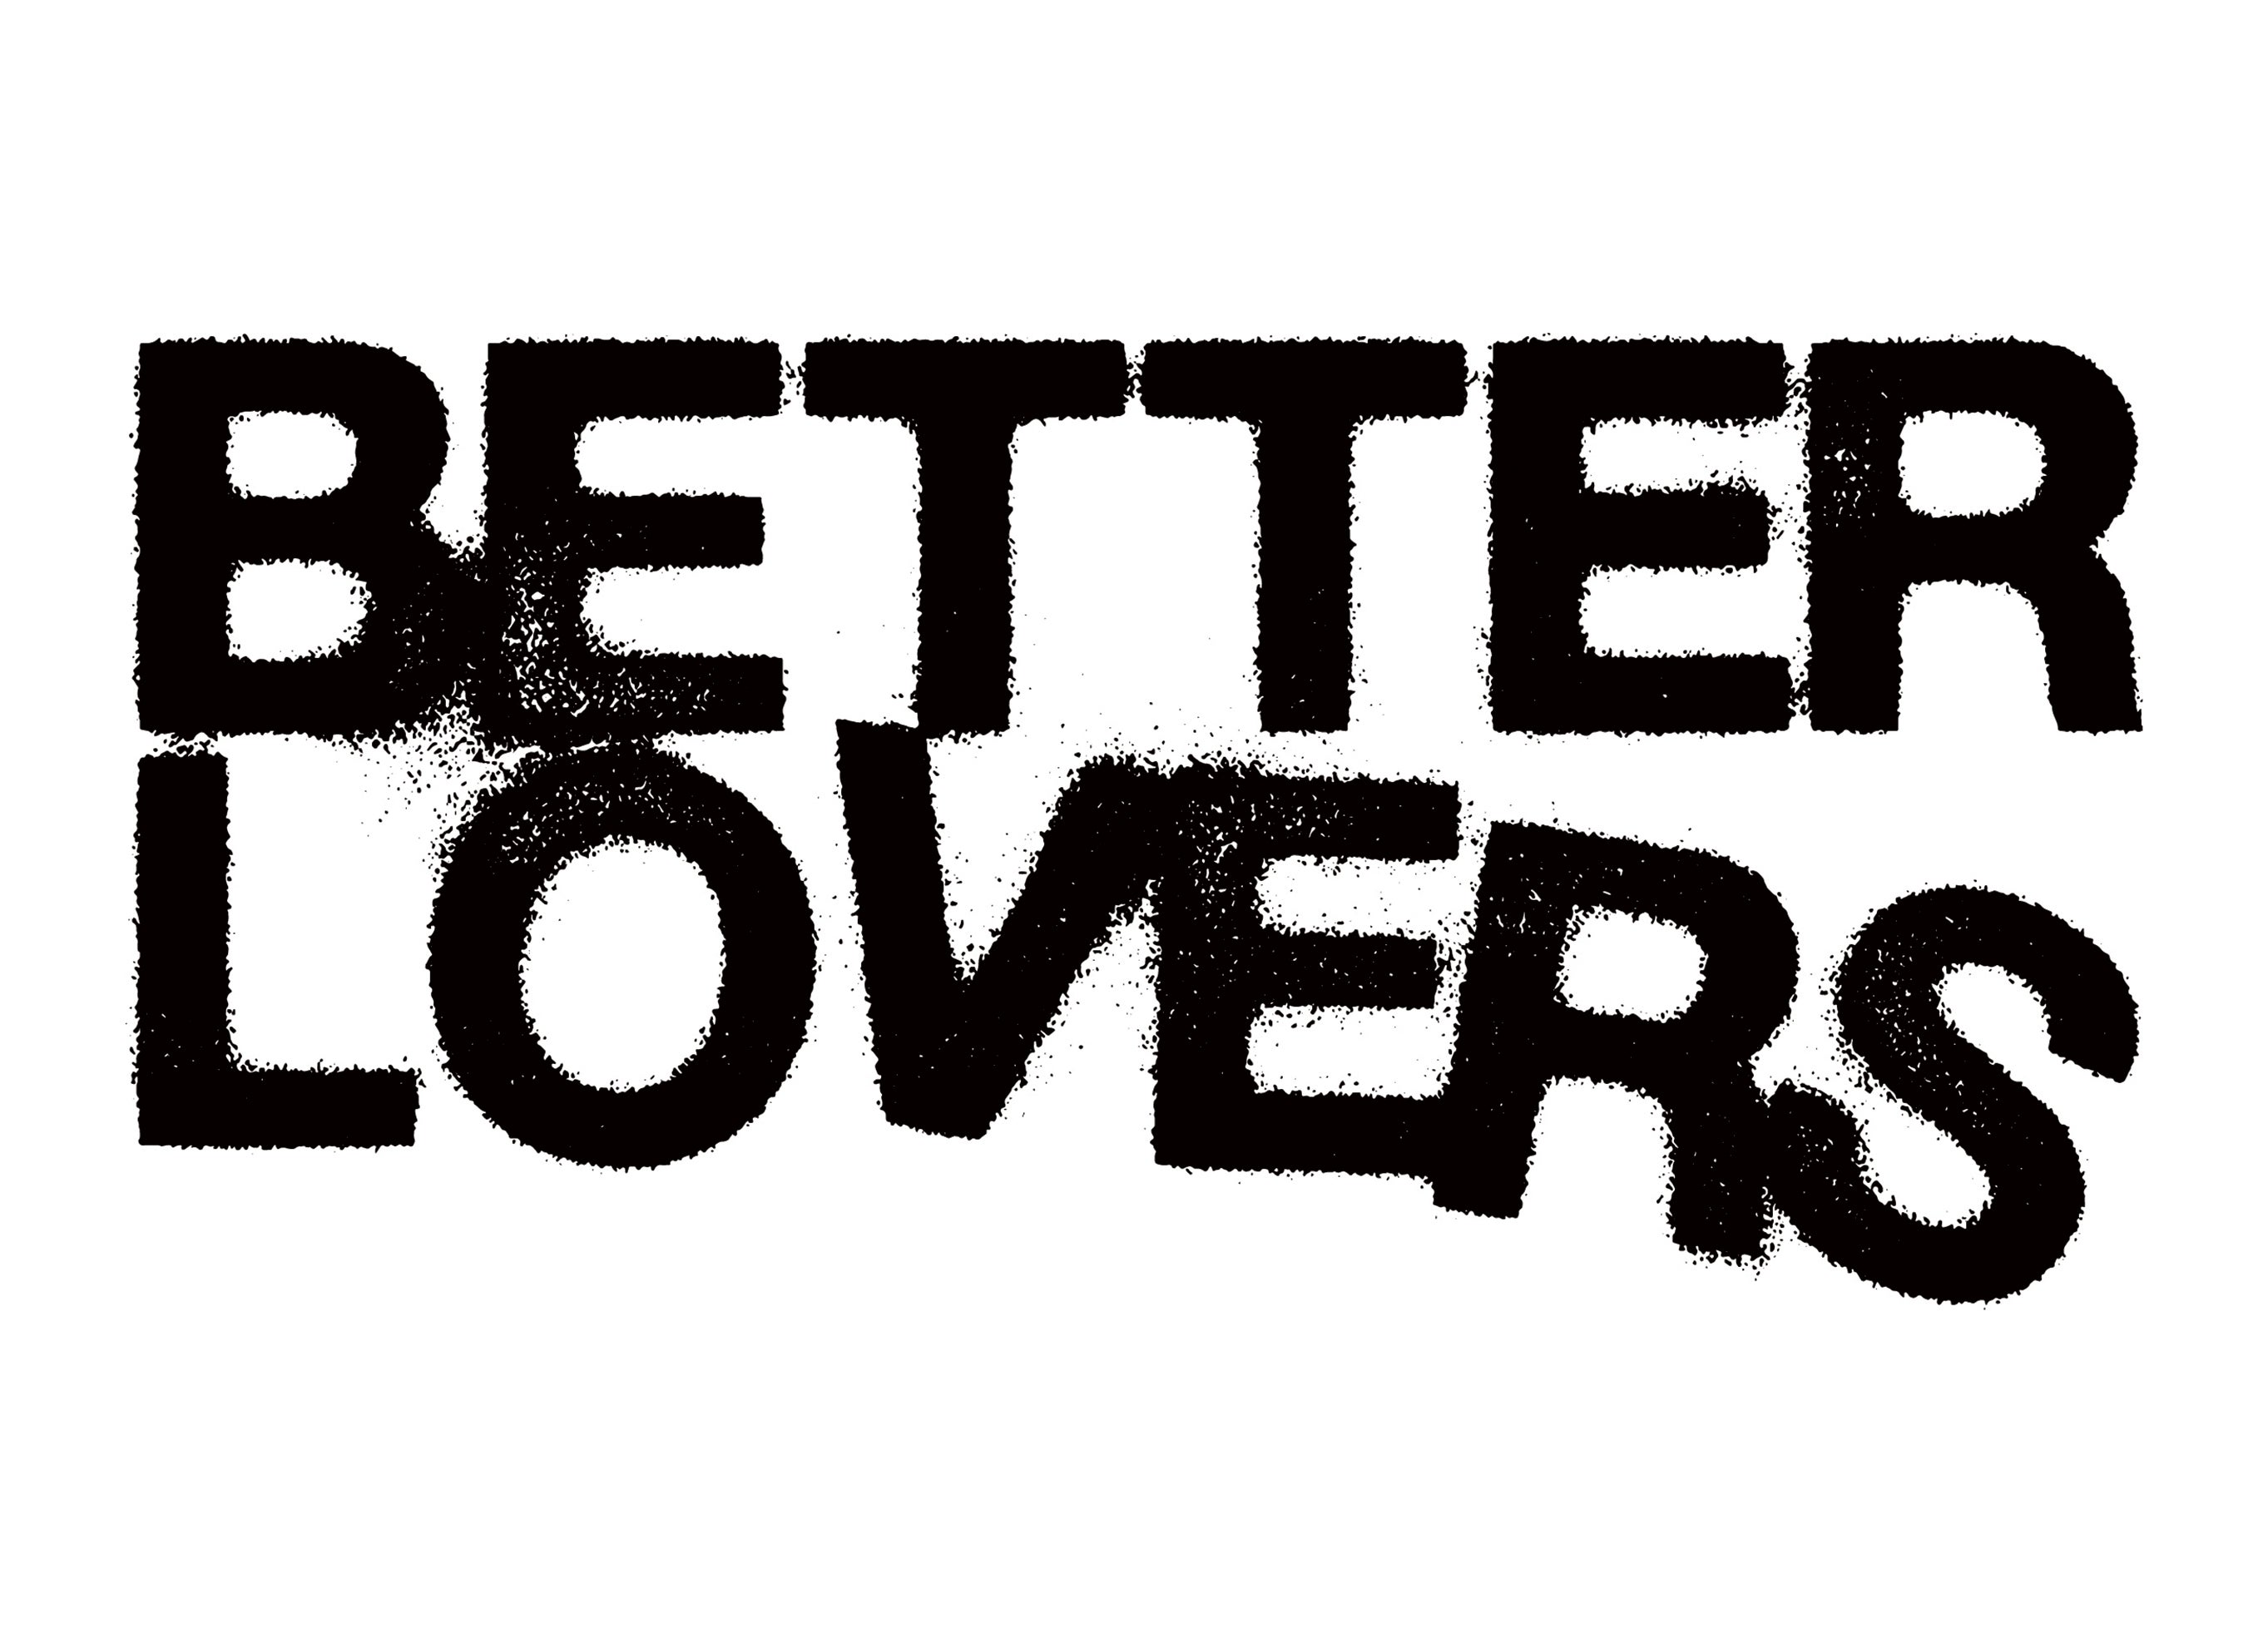 Better Lovers, SeeYouSpaceCowboy, Foreign Hands, Greyhaven